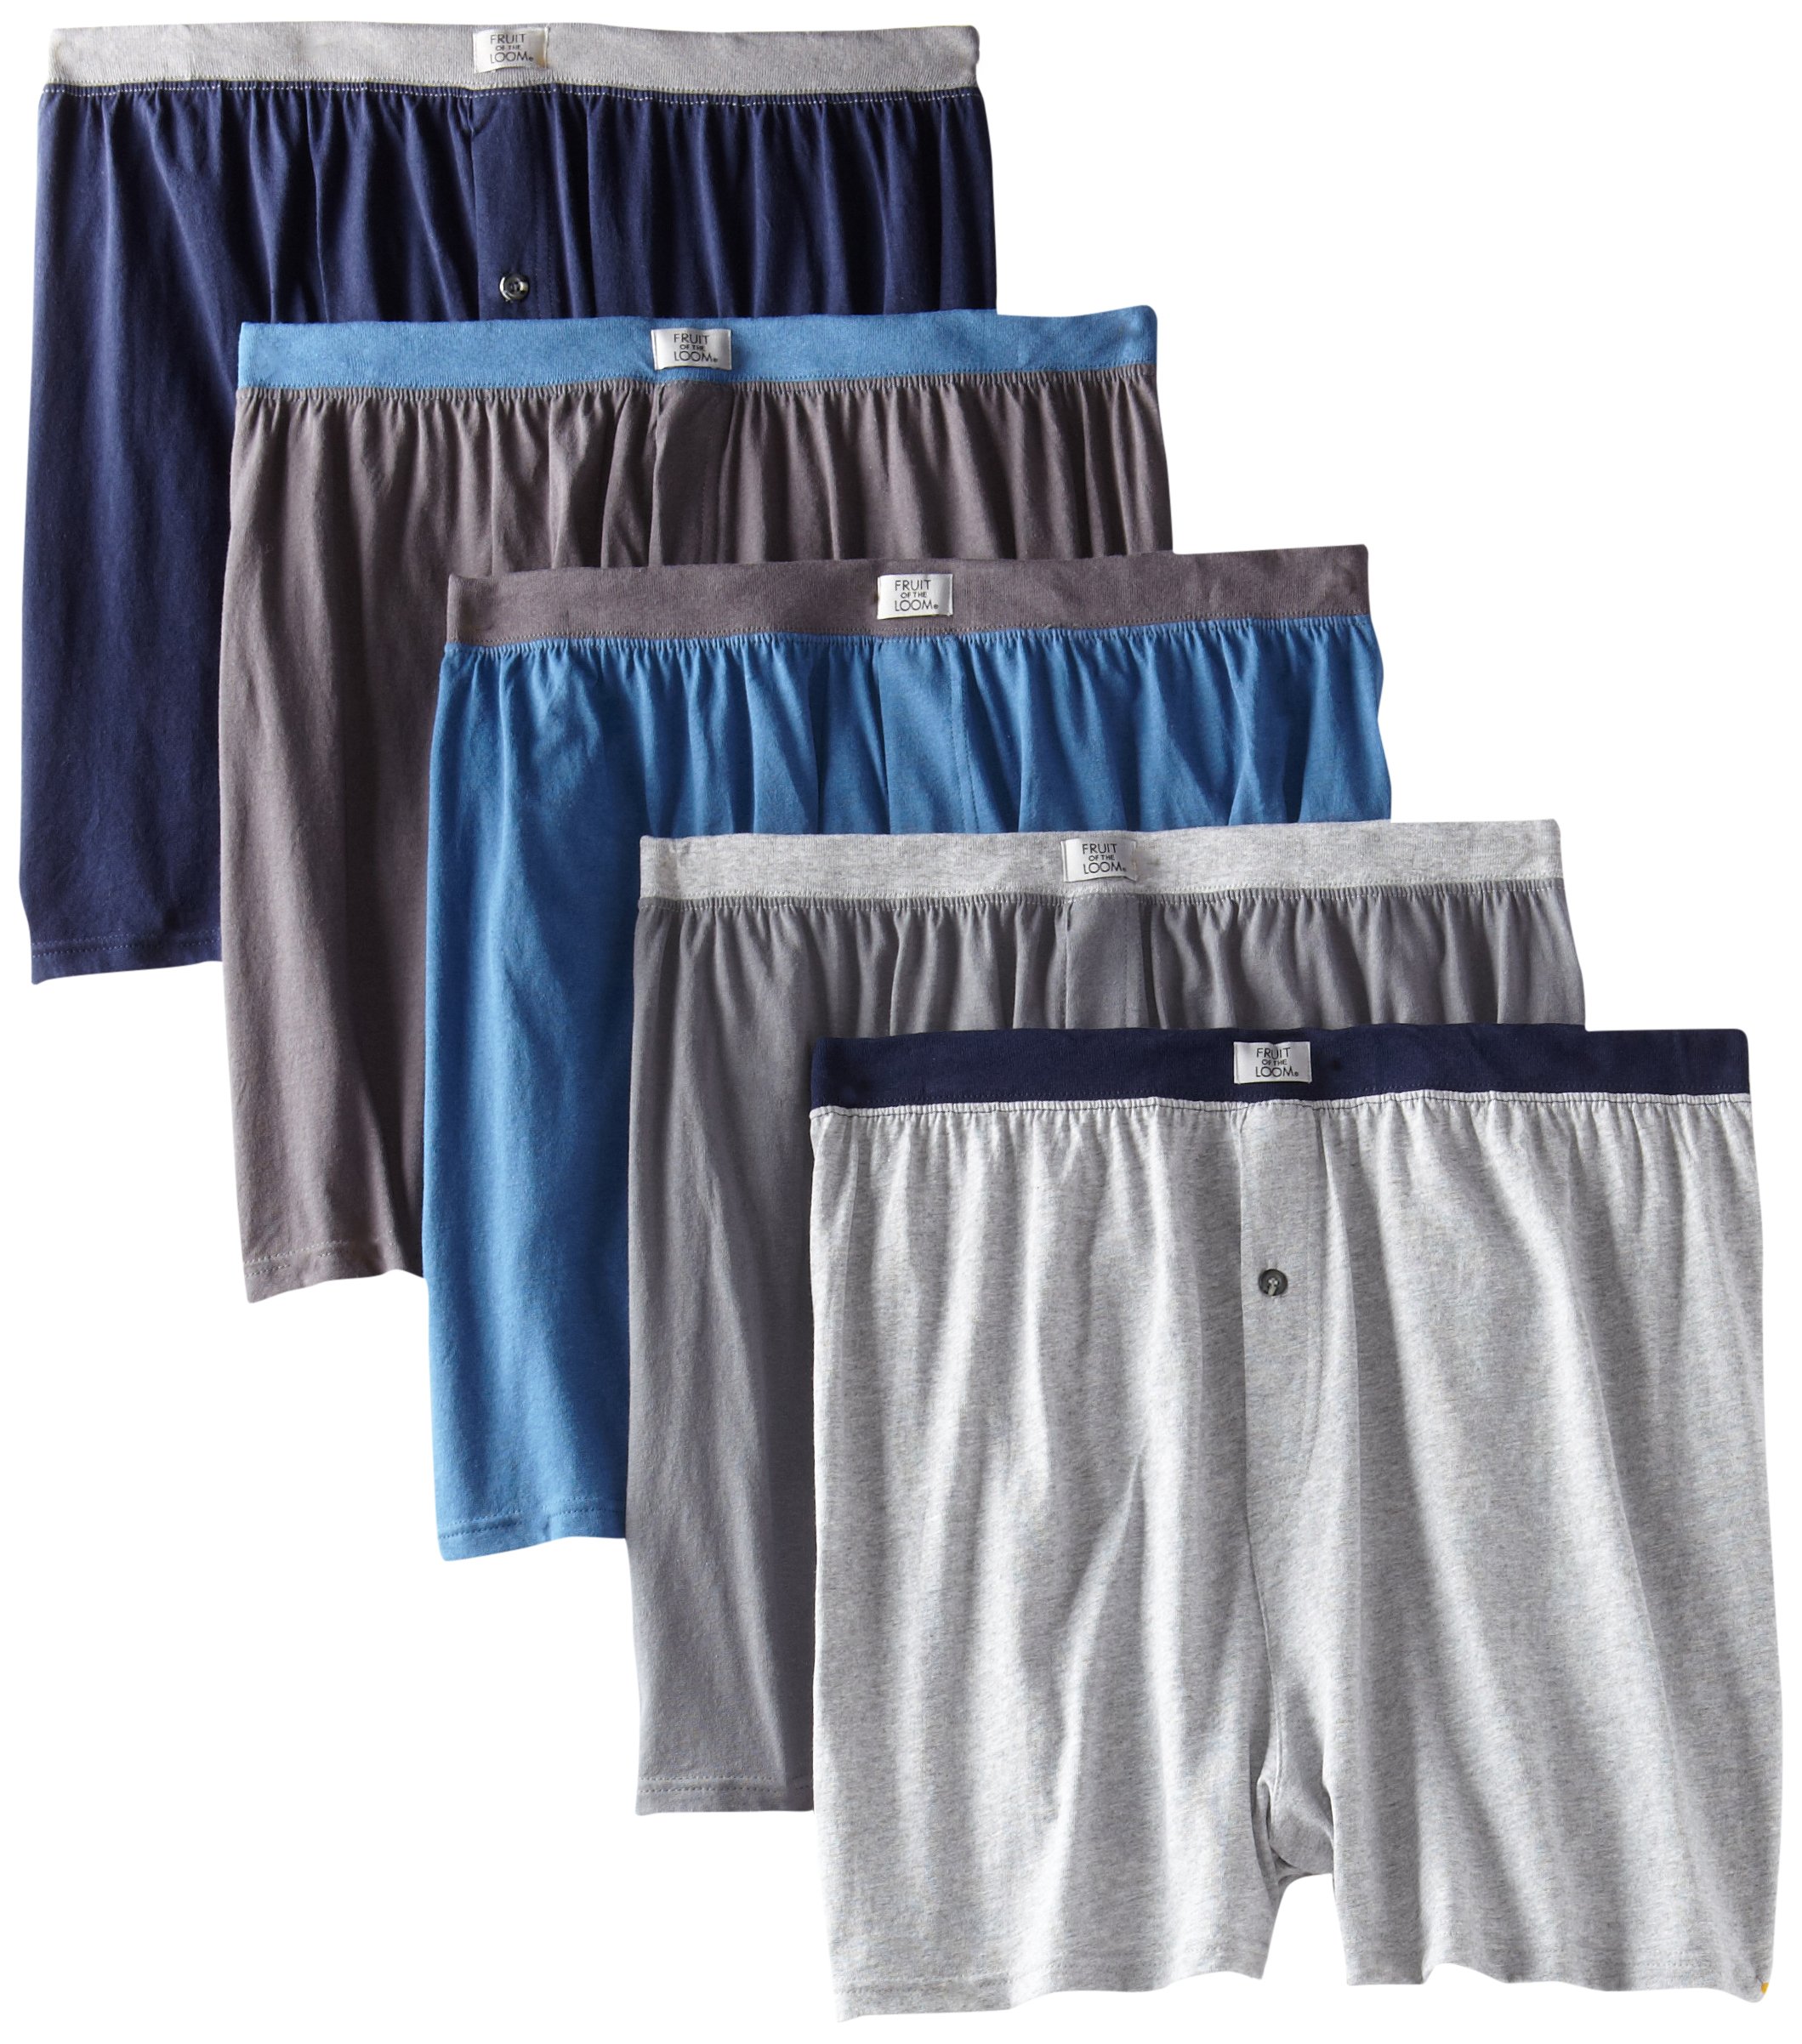 Fruit of the Loom Men's Exposed Waistband Knit Boxer (5 Pack) - image 2 of 2